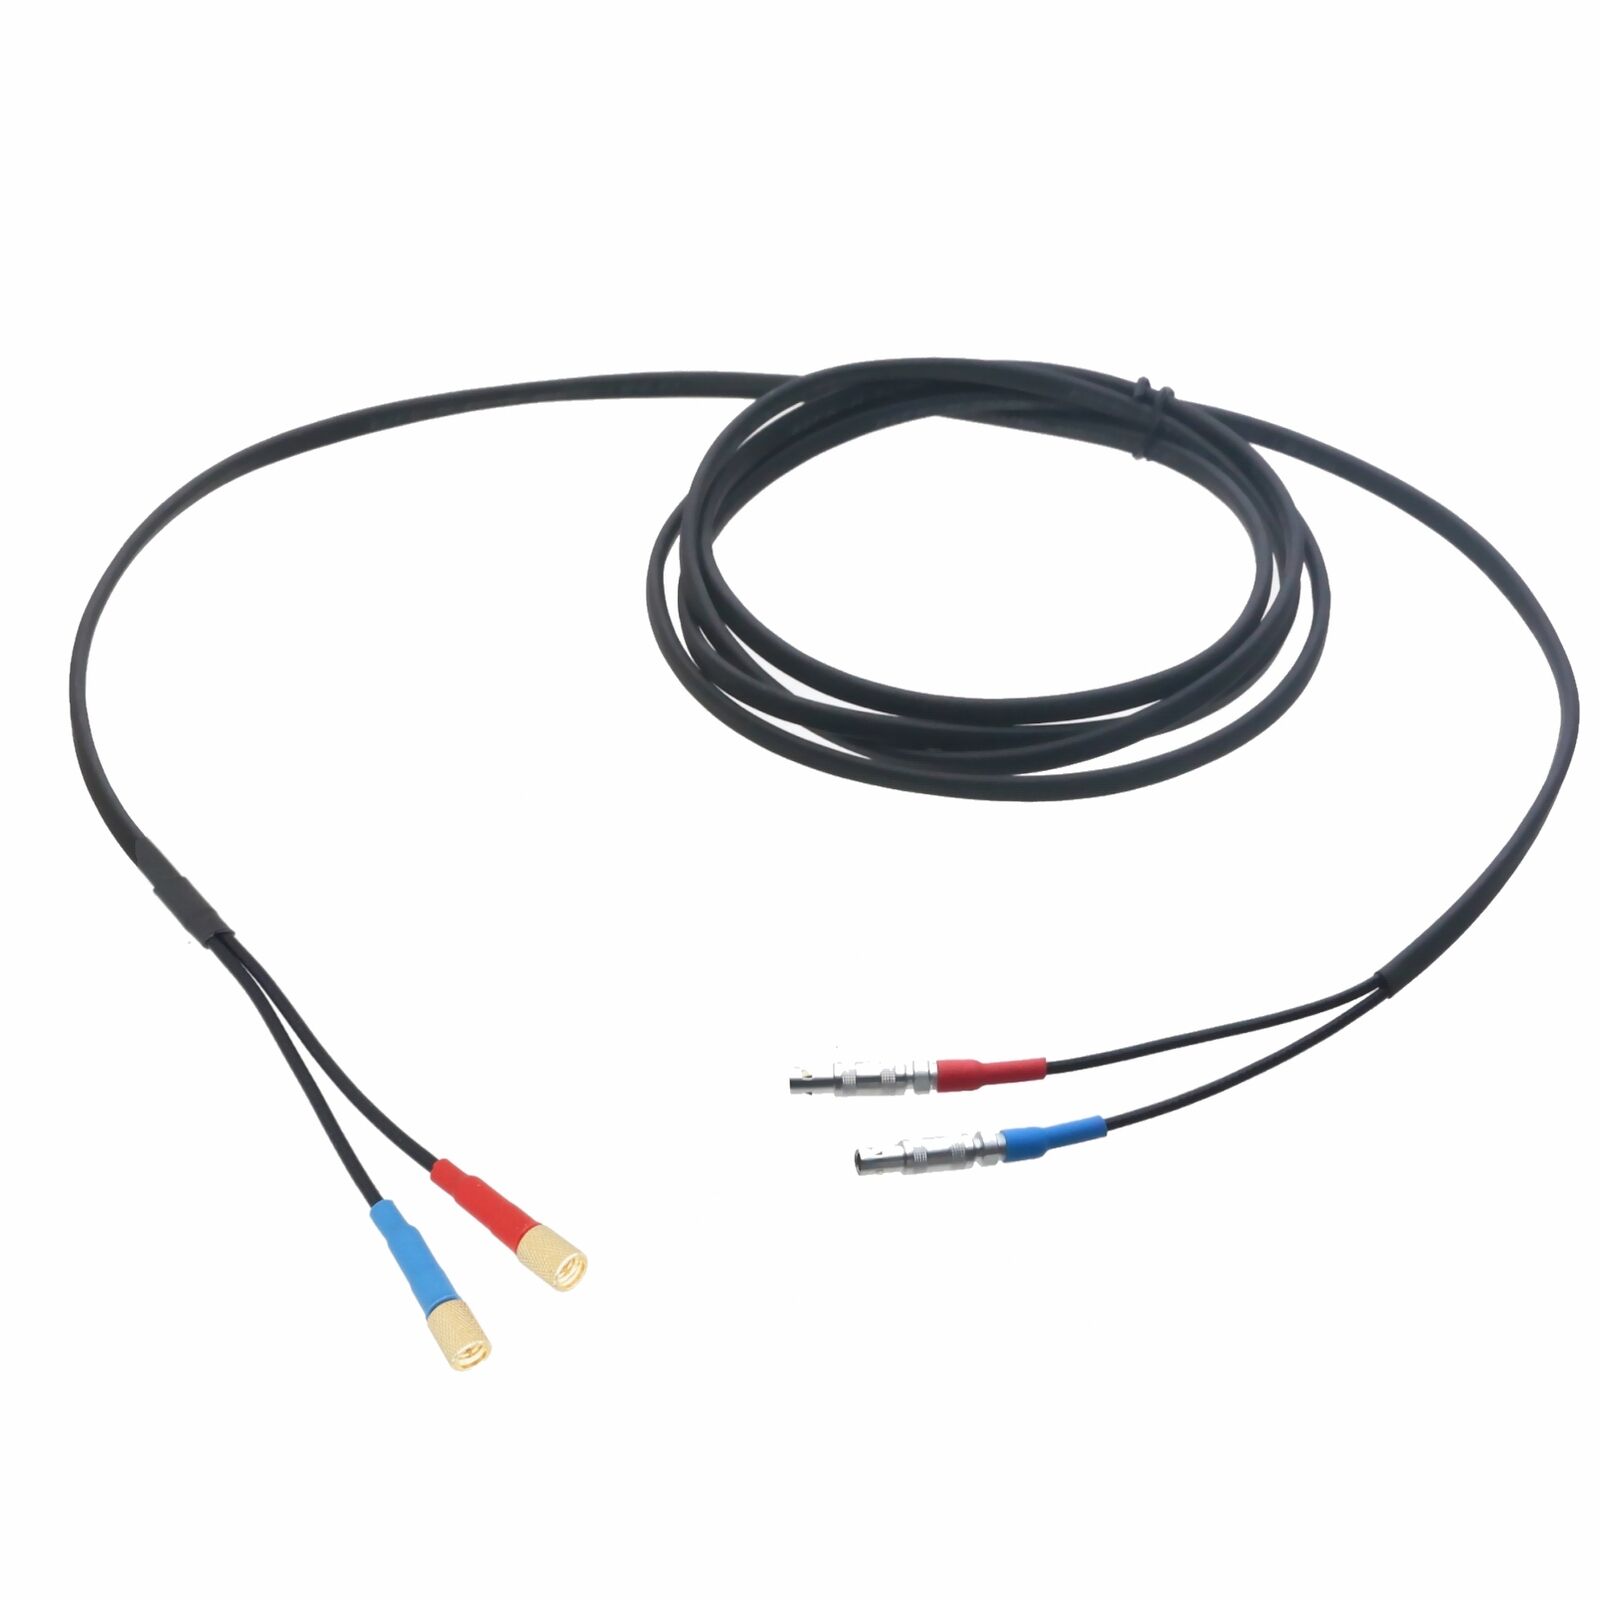 Microdot 10-32 To Red Blue Connector Cable For Panametrics Ultrasonic Transducer